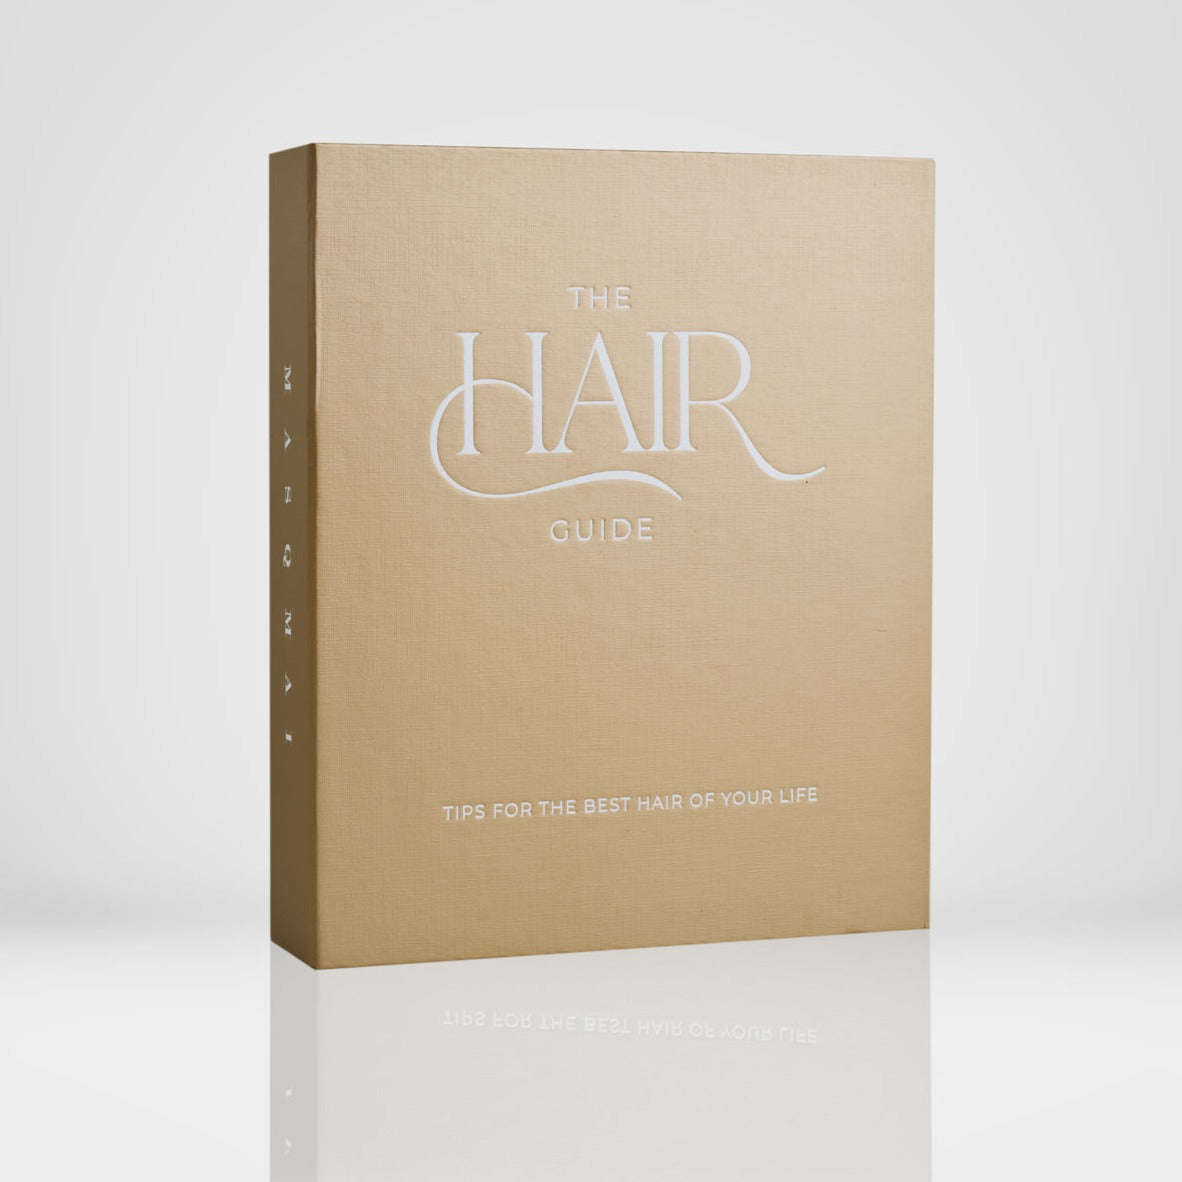 THE HAIR GUIDE